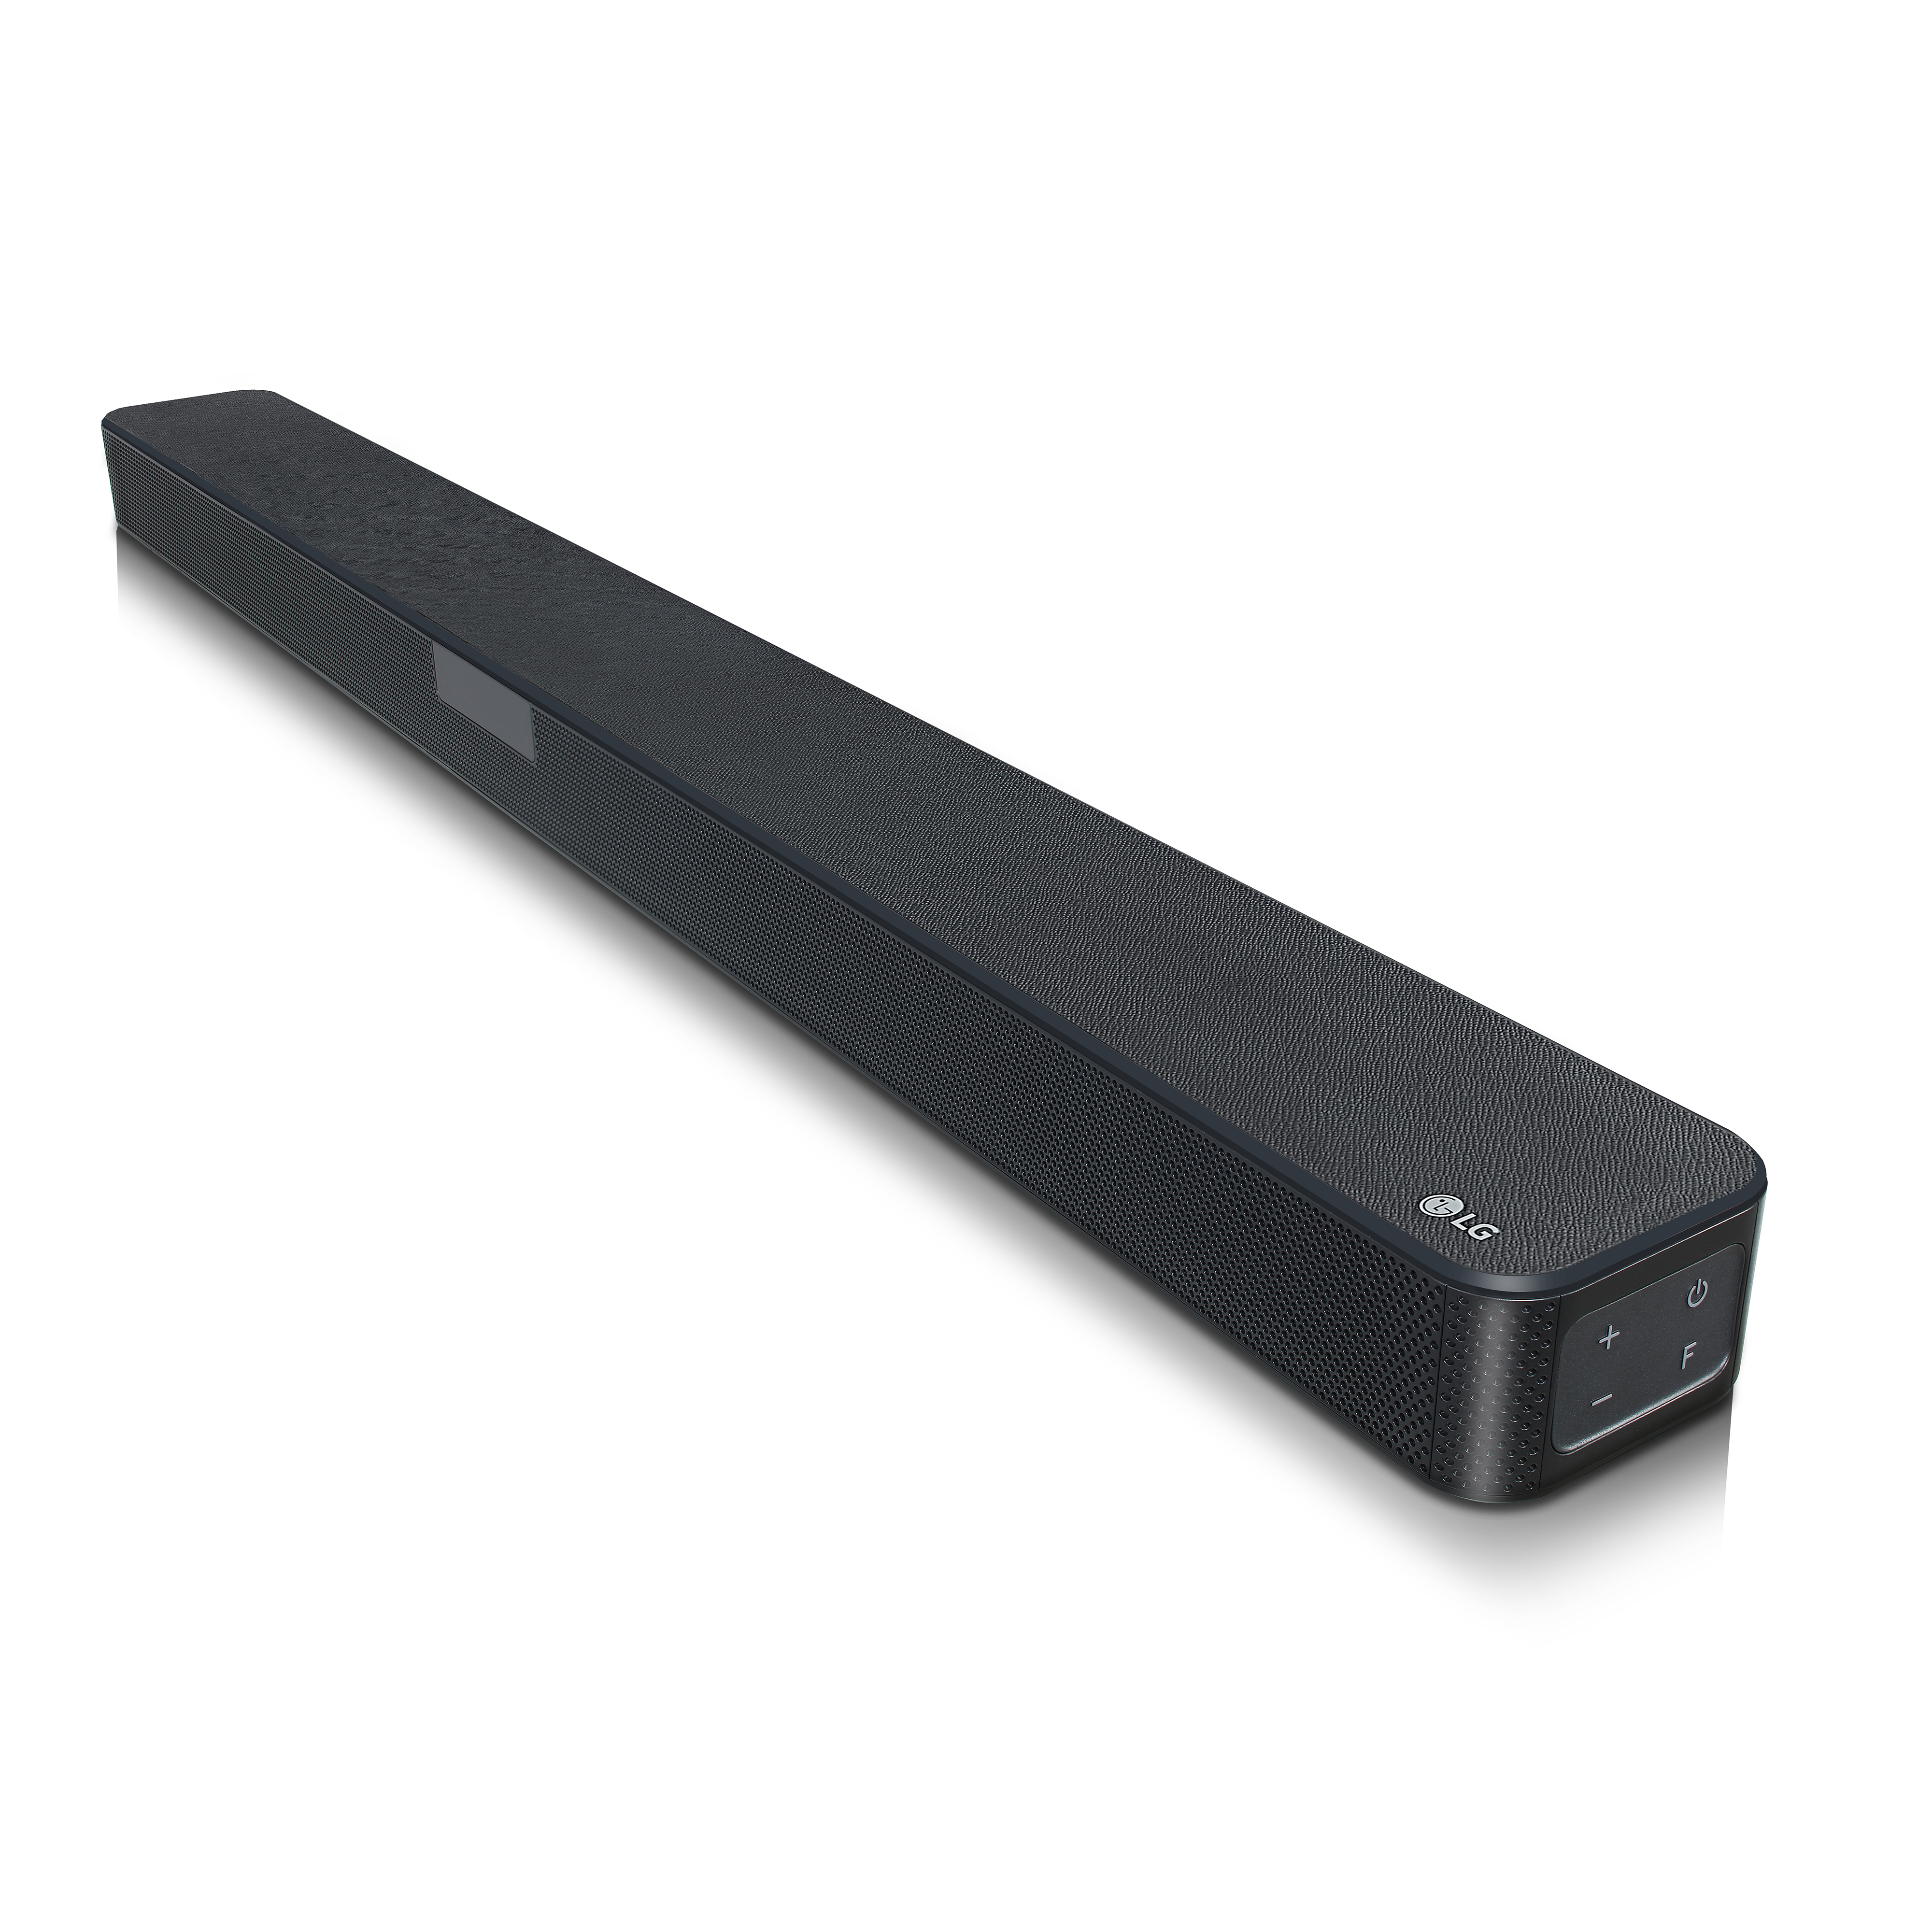 LG 3.1.2 Channel 440W High Res Audio Soundbar with Dolby Atmos® and Google Assistant Built-In - SL8YG - image 8 of 11